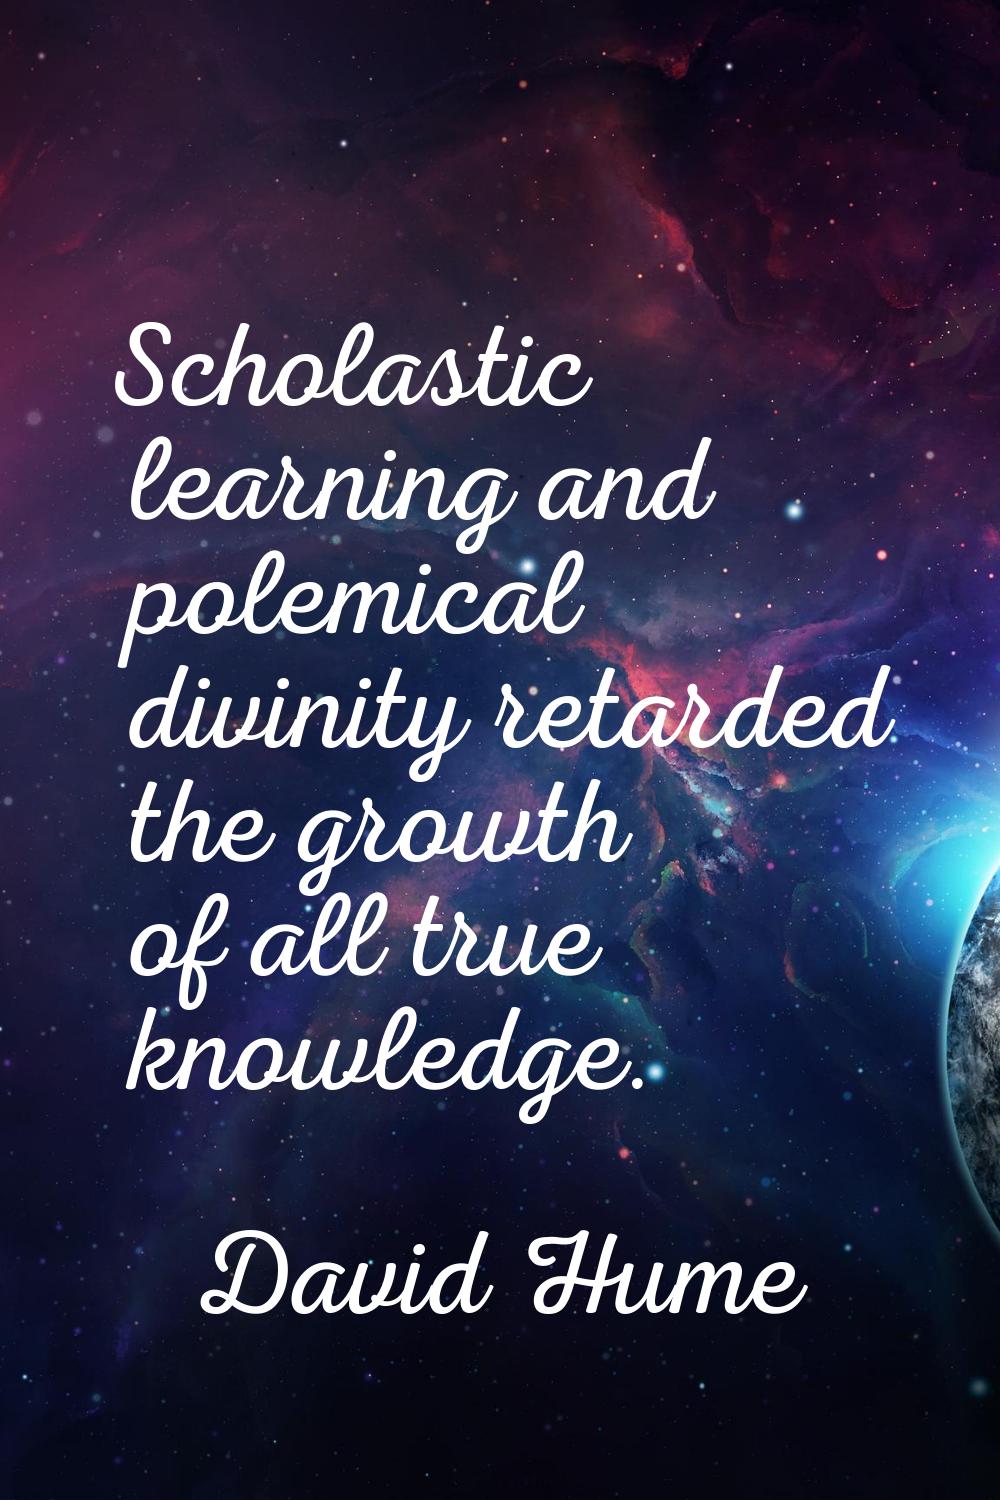 Scholastic learning and polemical divinity retarded the growth of all true knowledge.